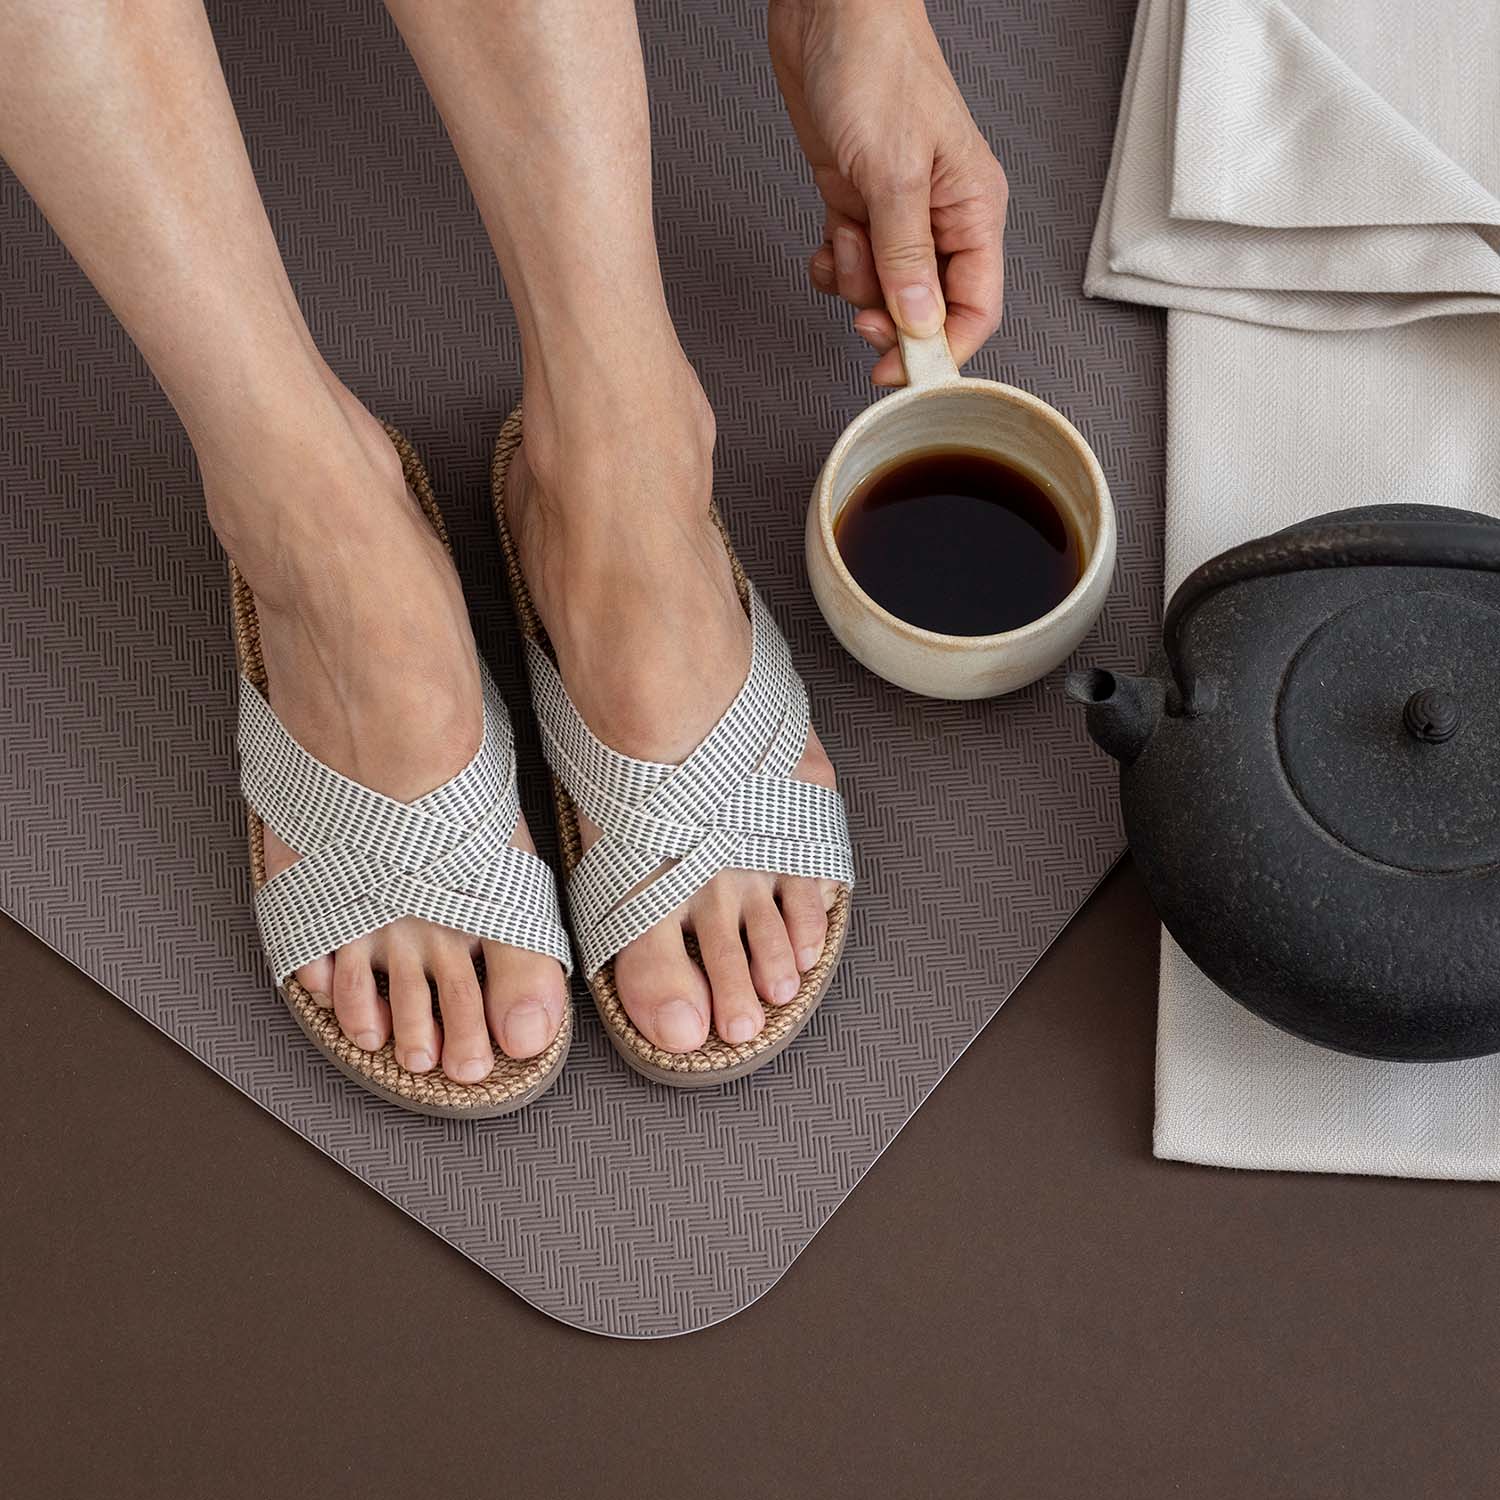 A pair of womens feet wearing Shangies sandals on a yoga mat next to a teapot and full mug of black tea